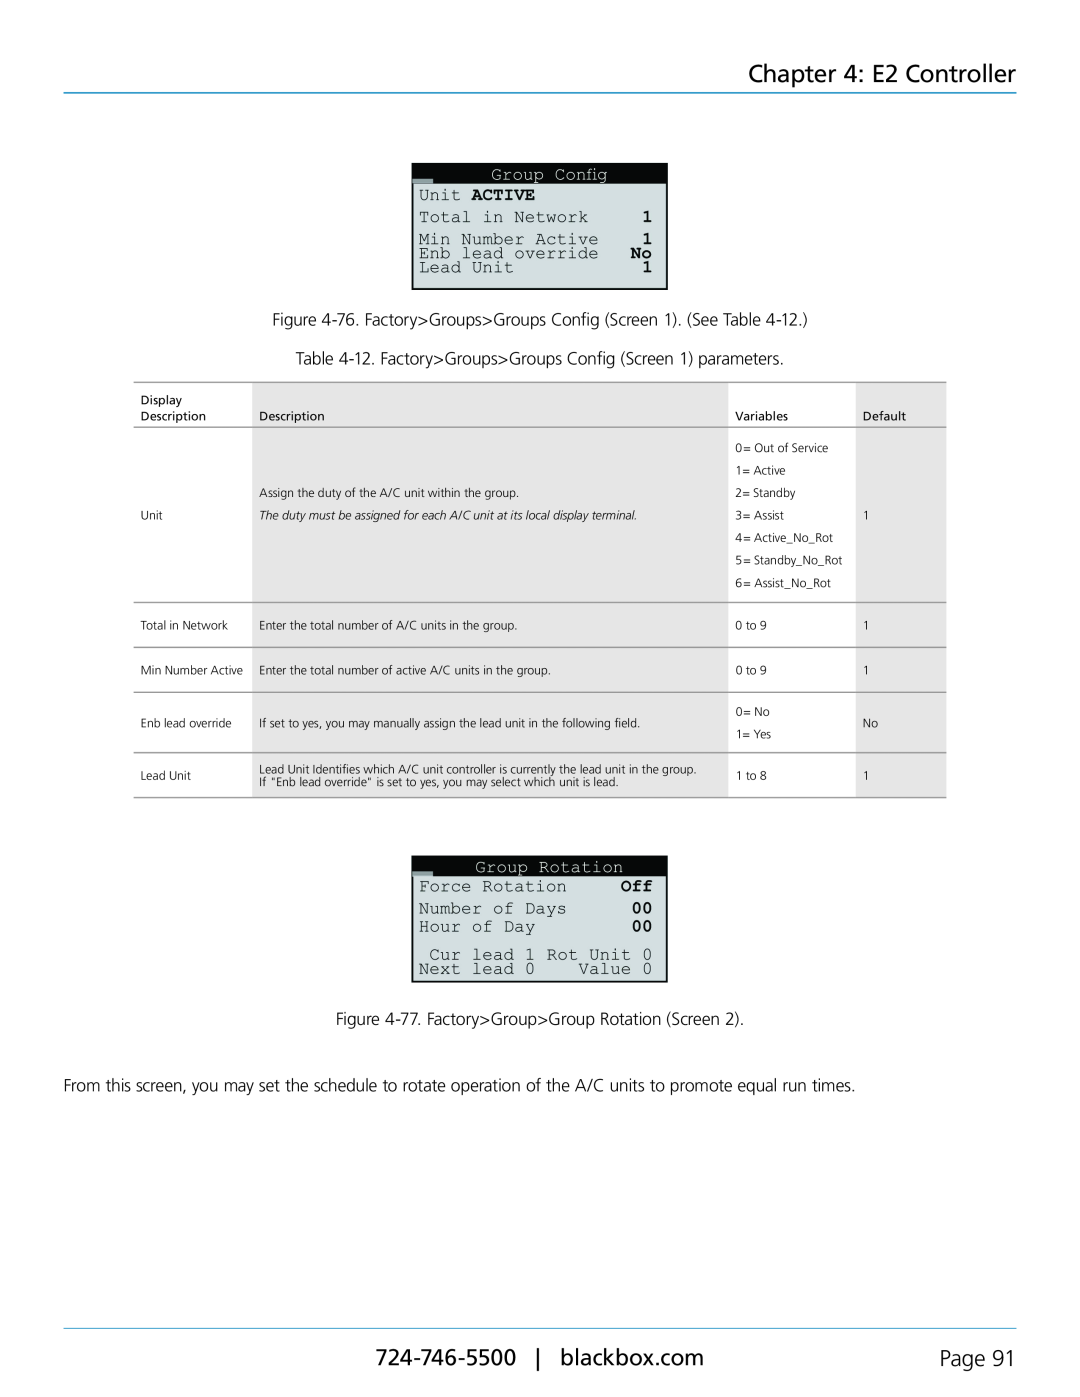 Black Box CRDX-W-FS-12KW, CRDX-A-FS-24KW user manual E2 Controller, Page, 76. FactoryGroupsGroups Config Screen 1. See Table 